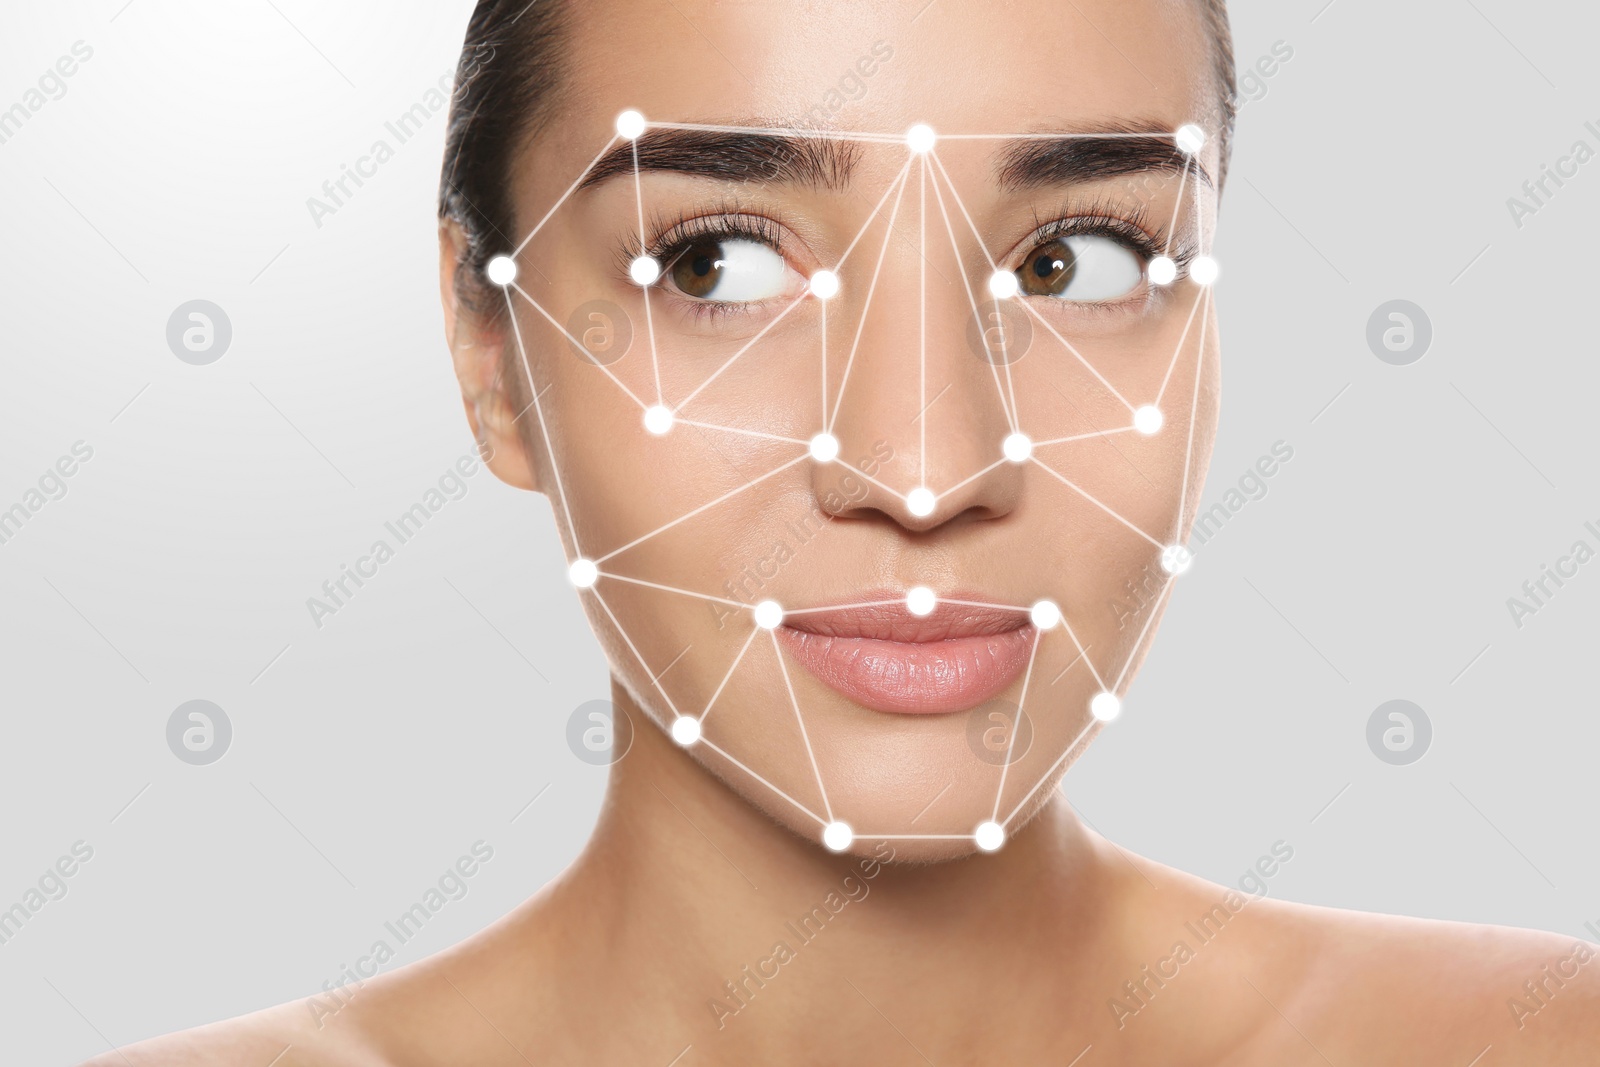 Image of Facial recognition system. Woman with digital biometric grid on light background, closeup